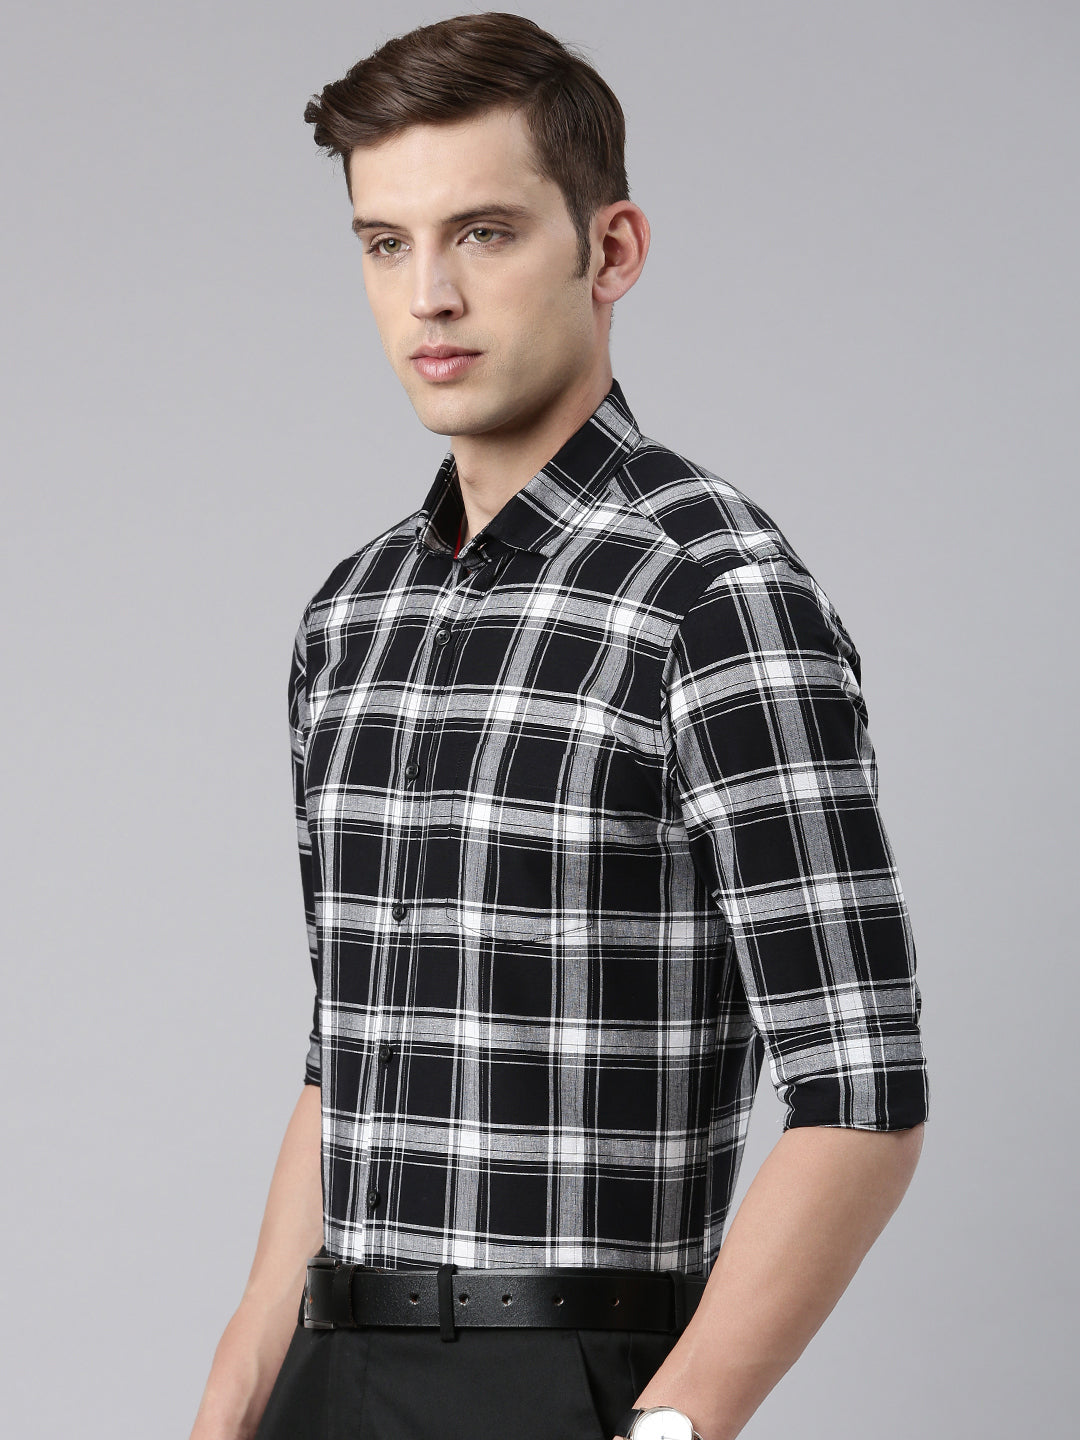 5thanfold Men's Formal Pure Cotton Full Sleeve Checkered Black Slim Fit Shirt